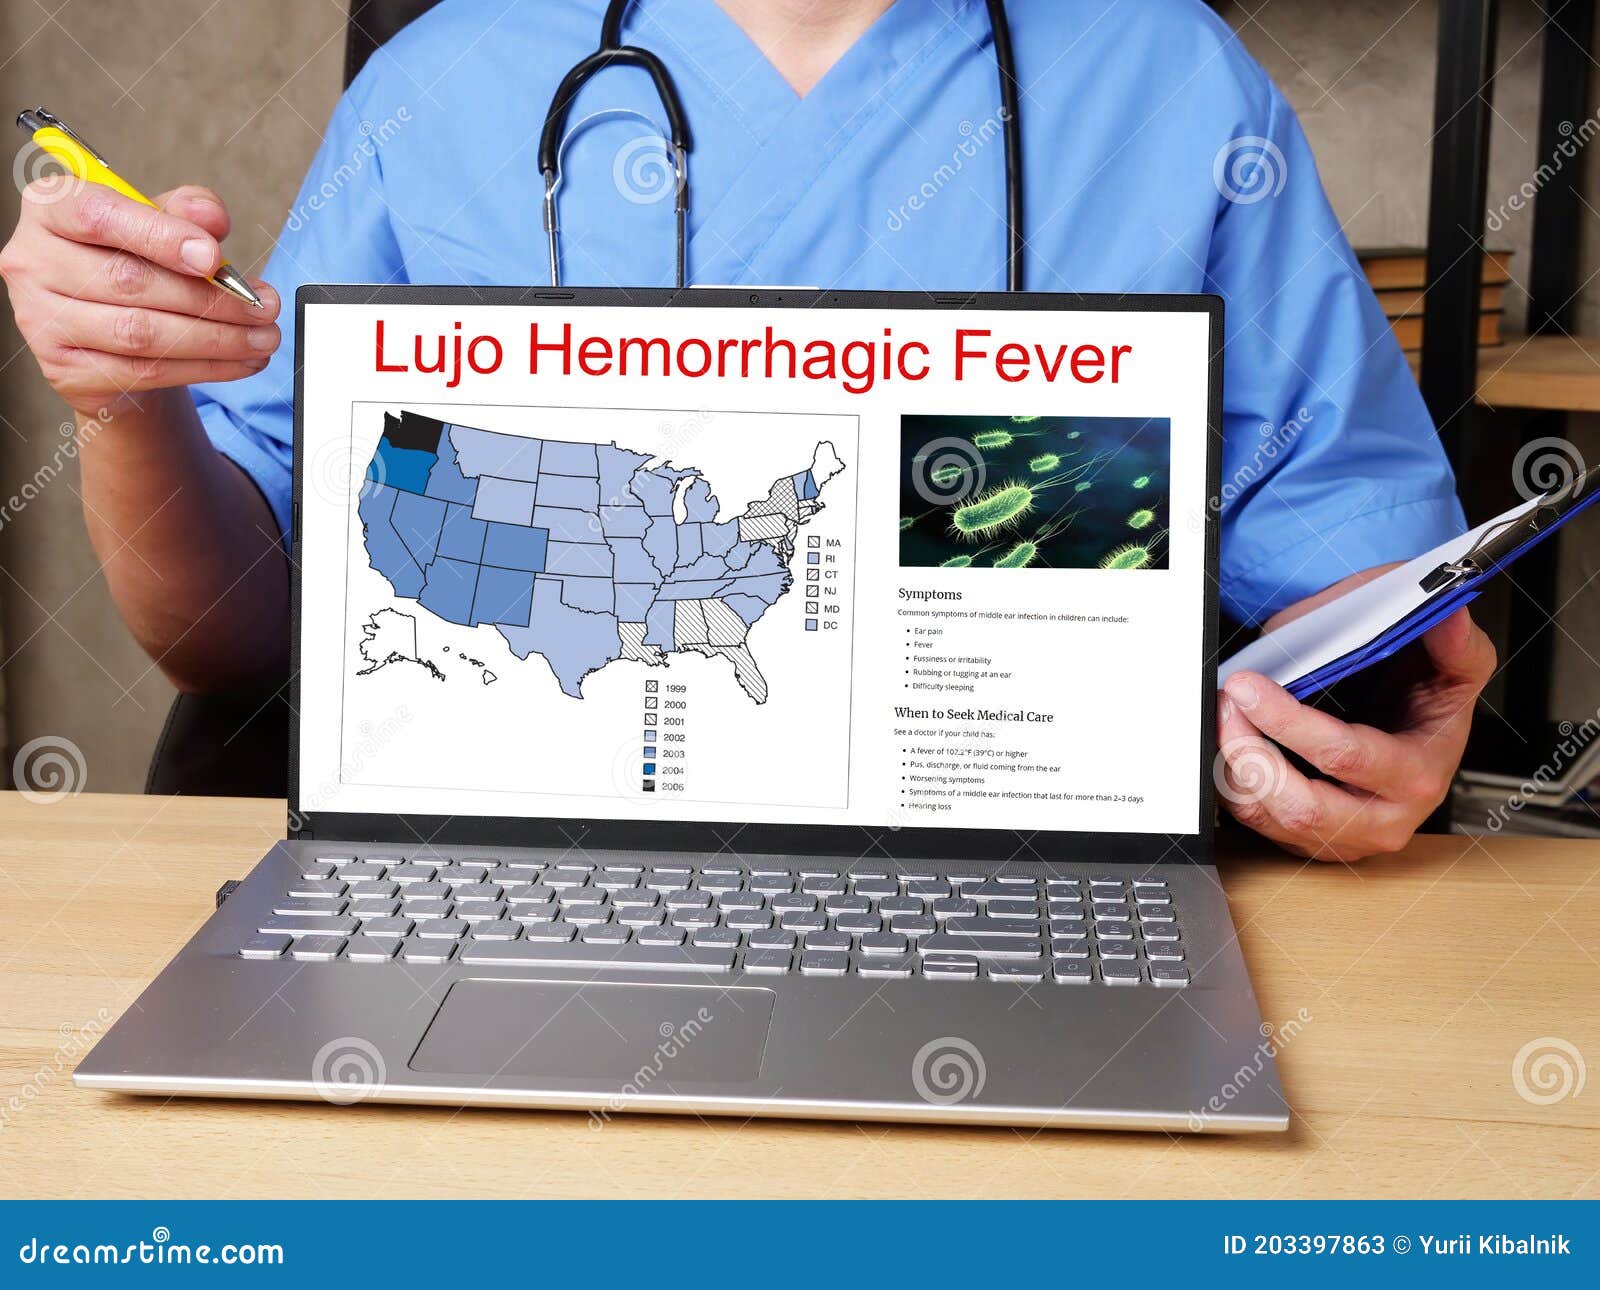 lujo hemorrhagic fever sign on the page